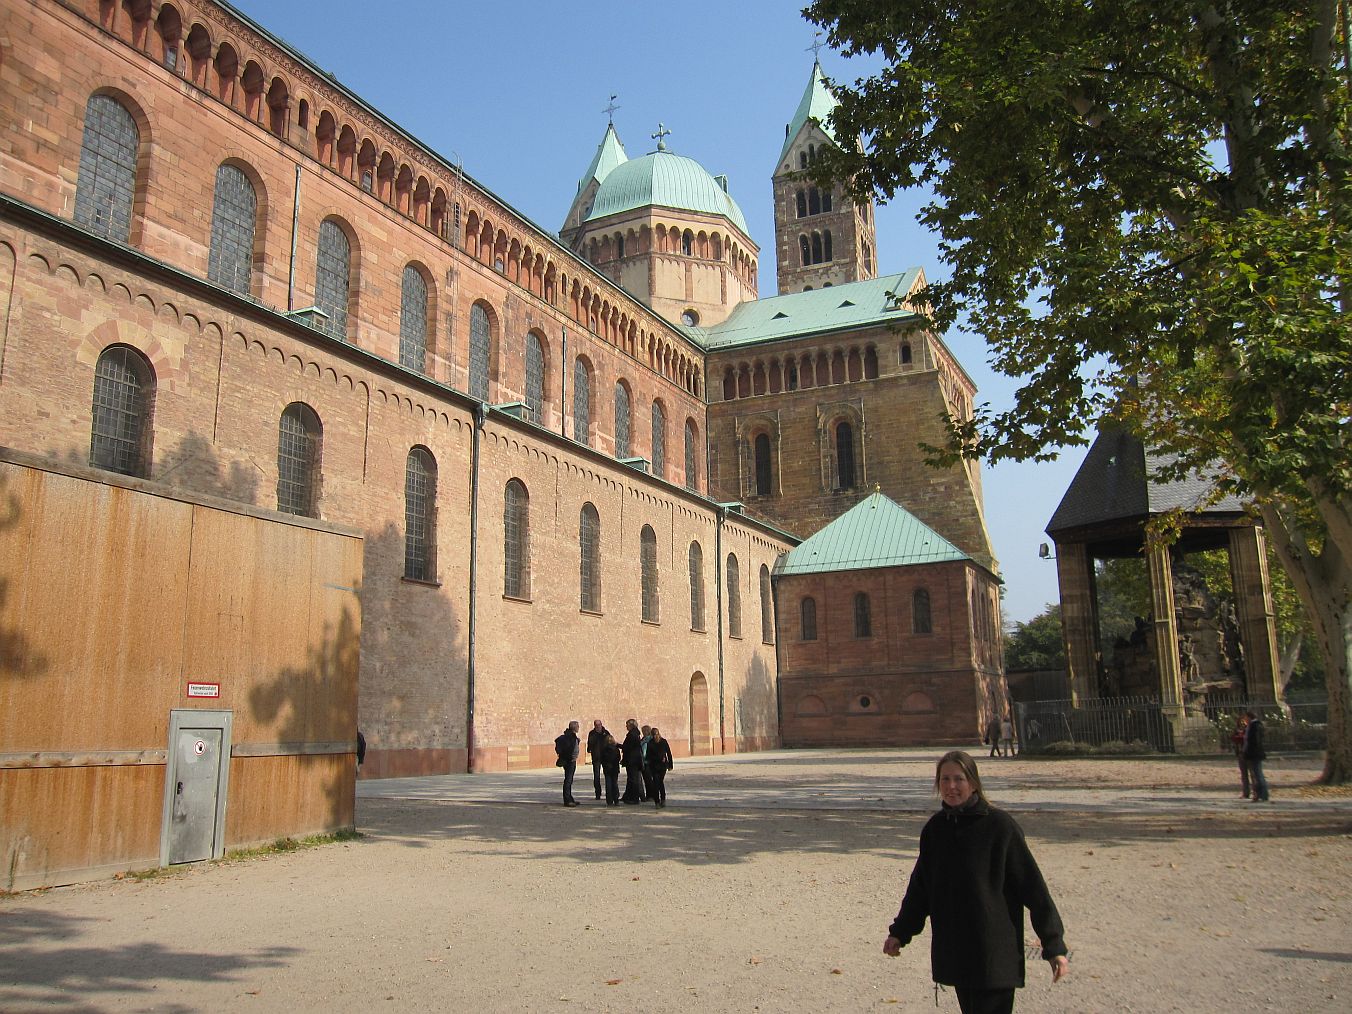 Cathedral at Speyer